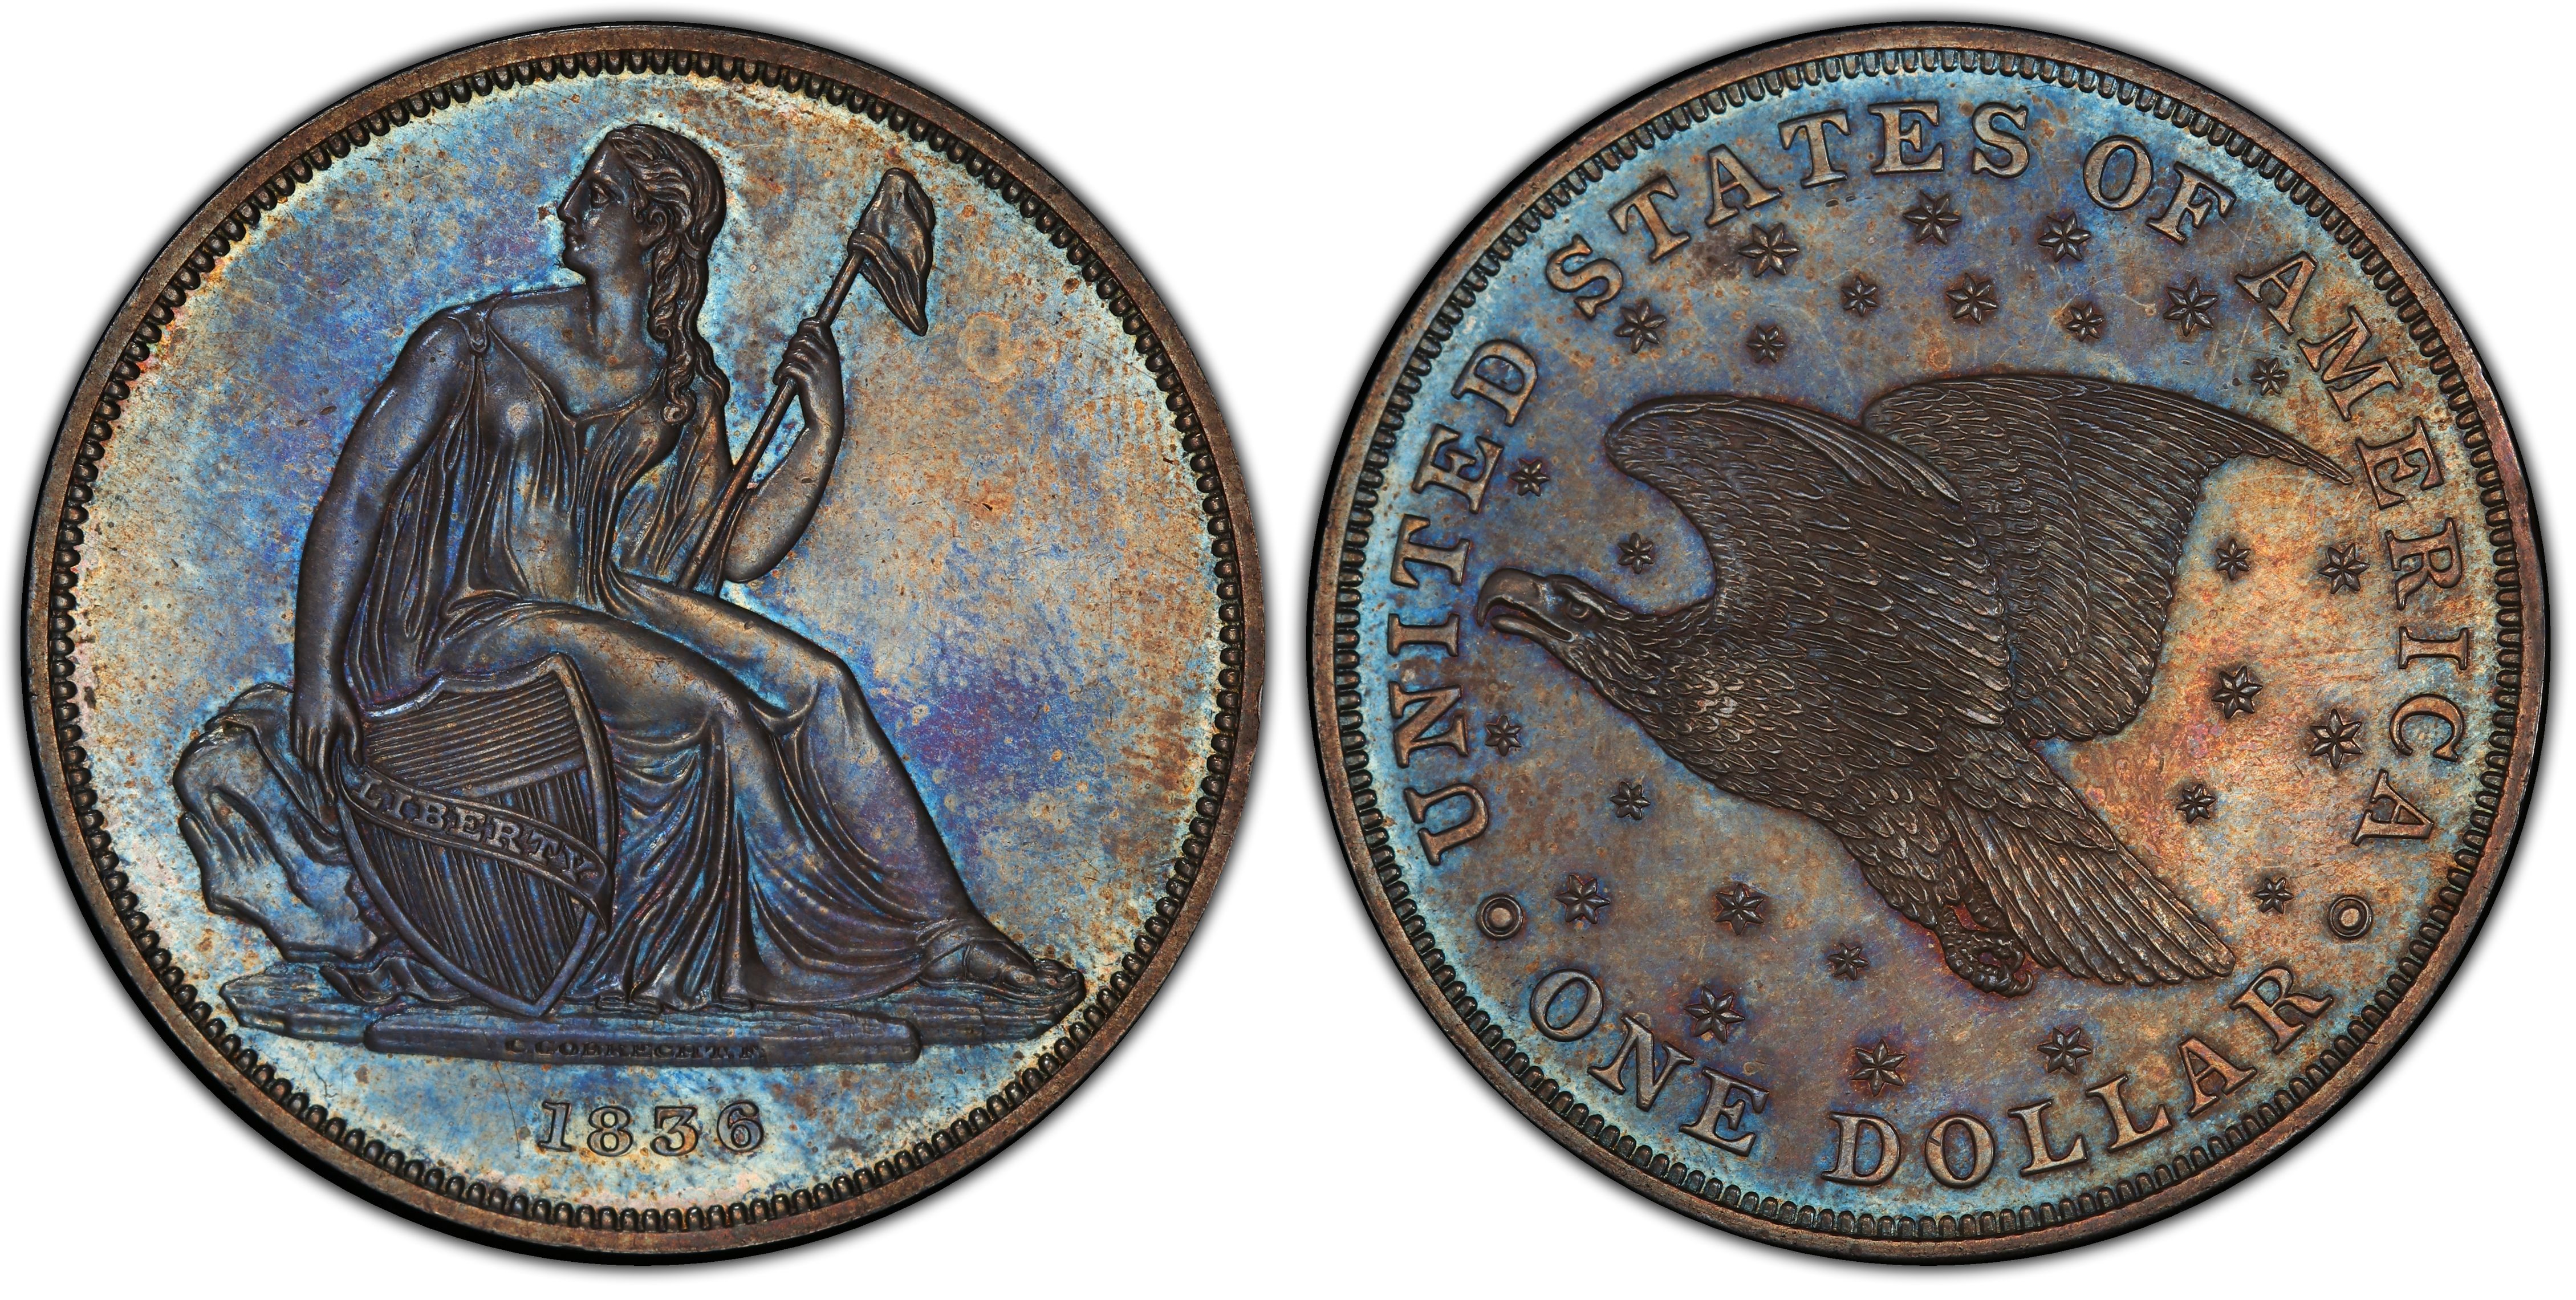 1 OZ COPPER COIN 1836 SEATED LIBERTY LOT # 6 